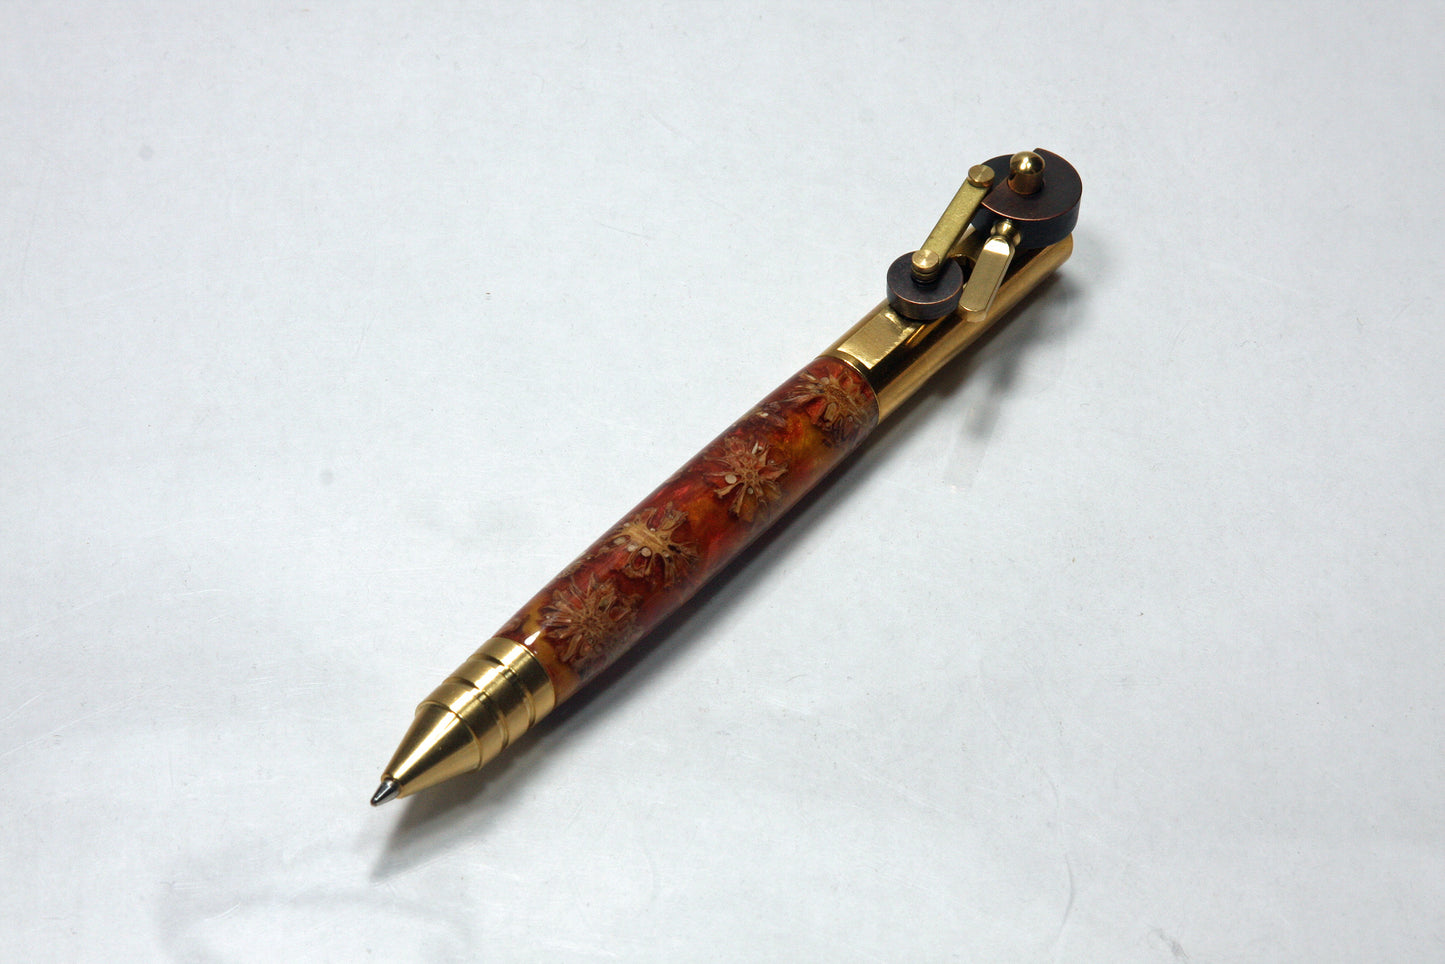 Steampunk Inspired Piston Ballpoint Pen with Dual Finish Gears and Pinecone Resin Body